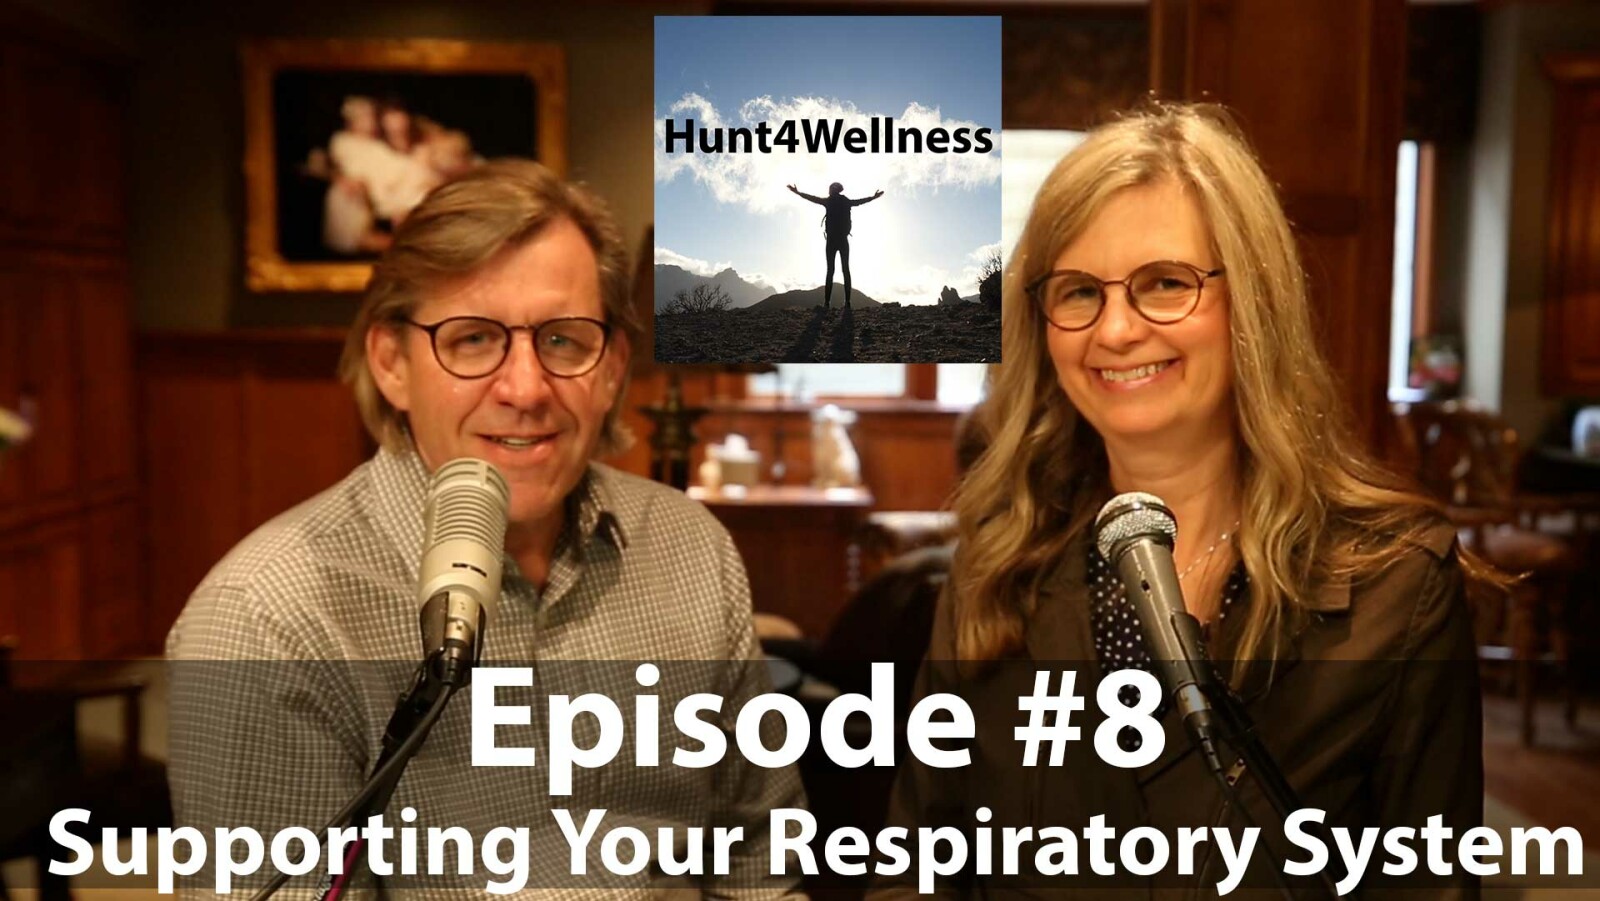 Episode #8 - Supporting Your Respiratory System